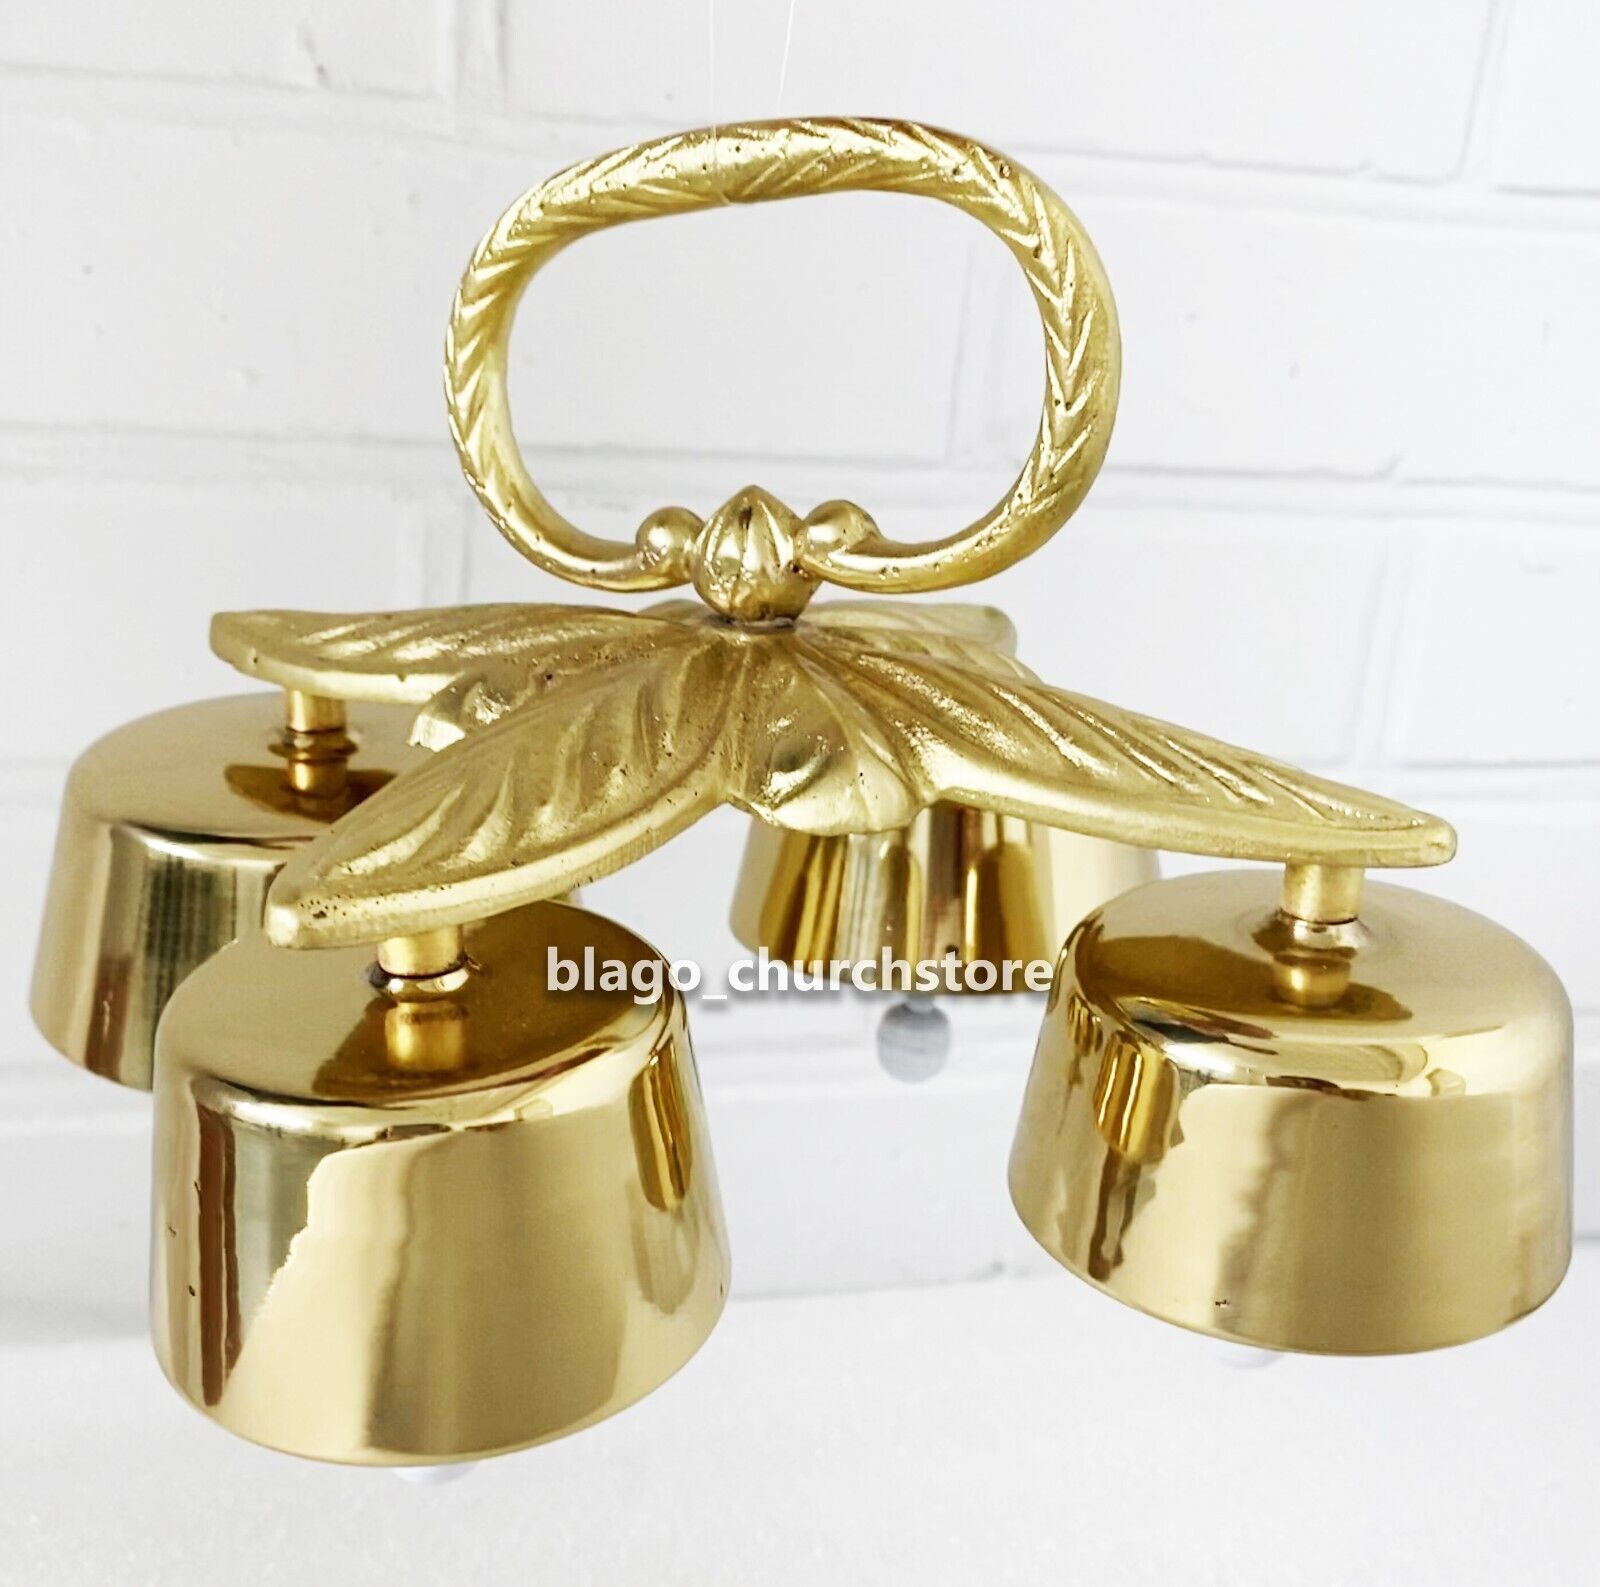 Traditional Handheld Church Bell Brass 4 Tones Manual Bell